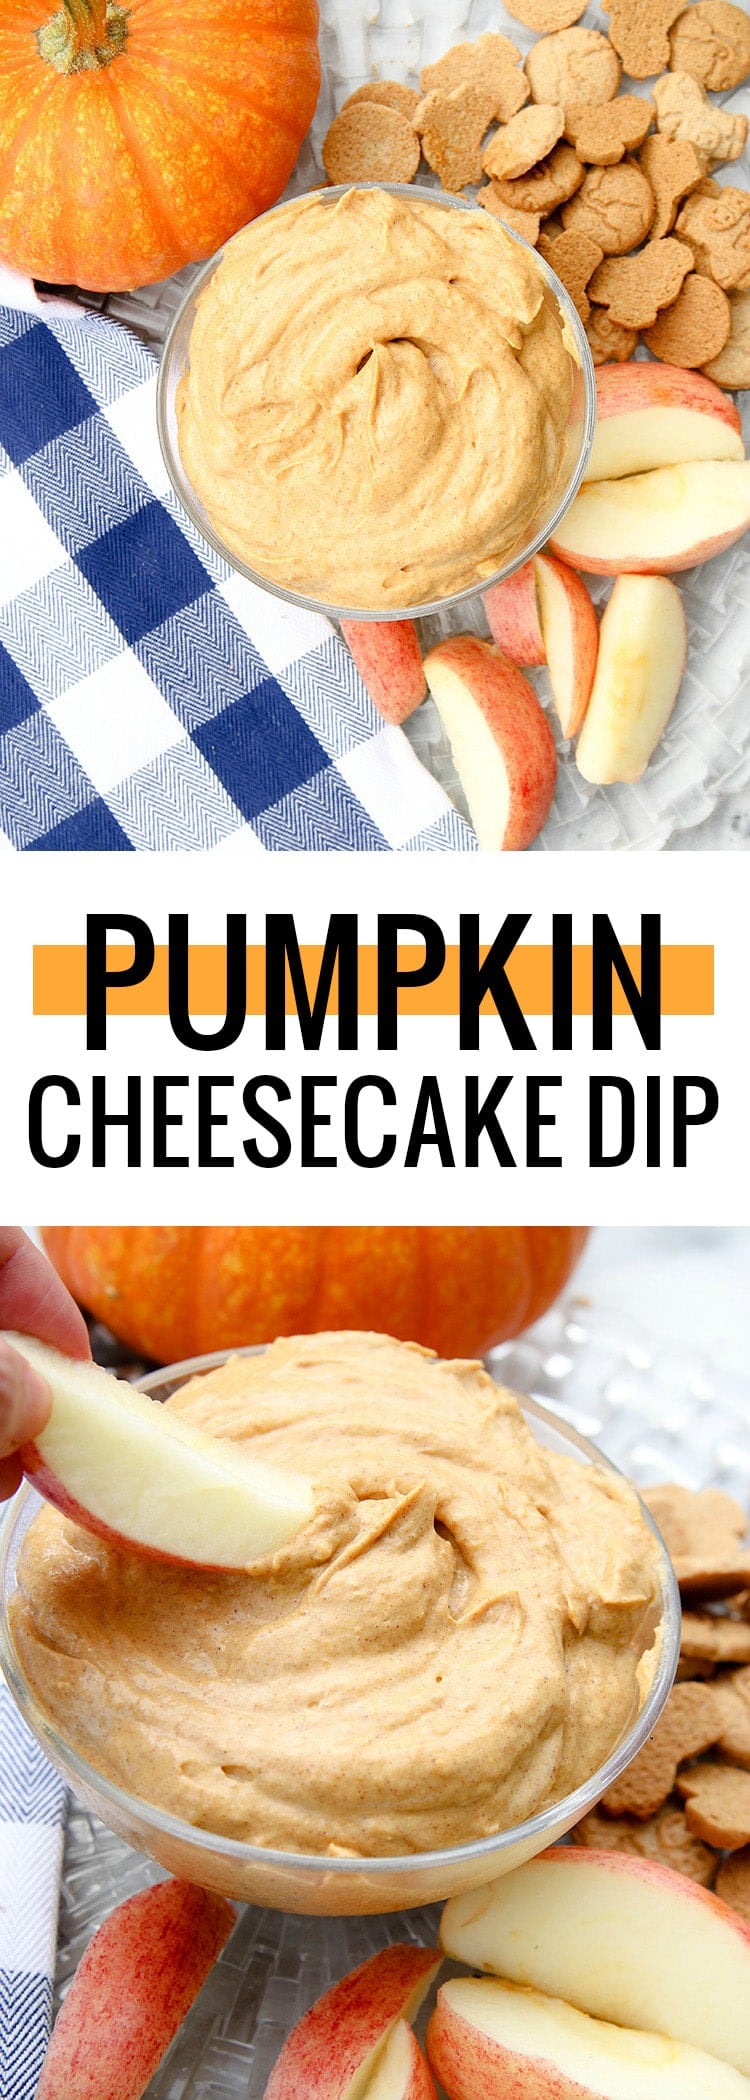 This pumpkin cheesecake recipe is so easy, delicious, and fun to make with the kids!